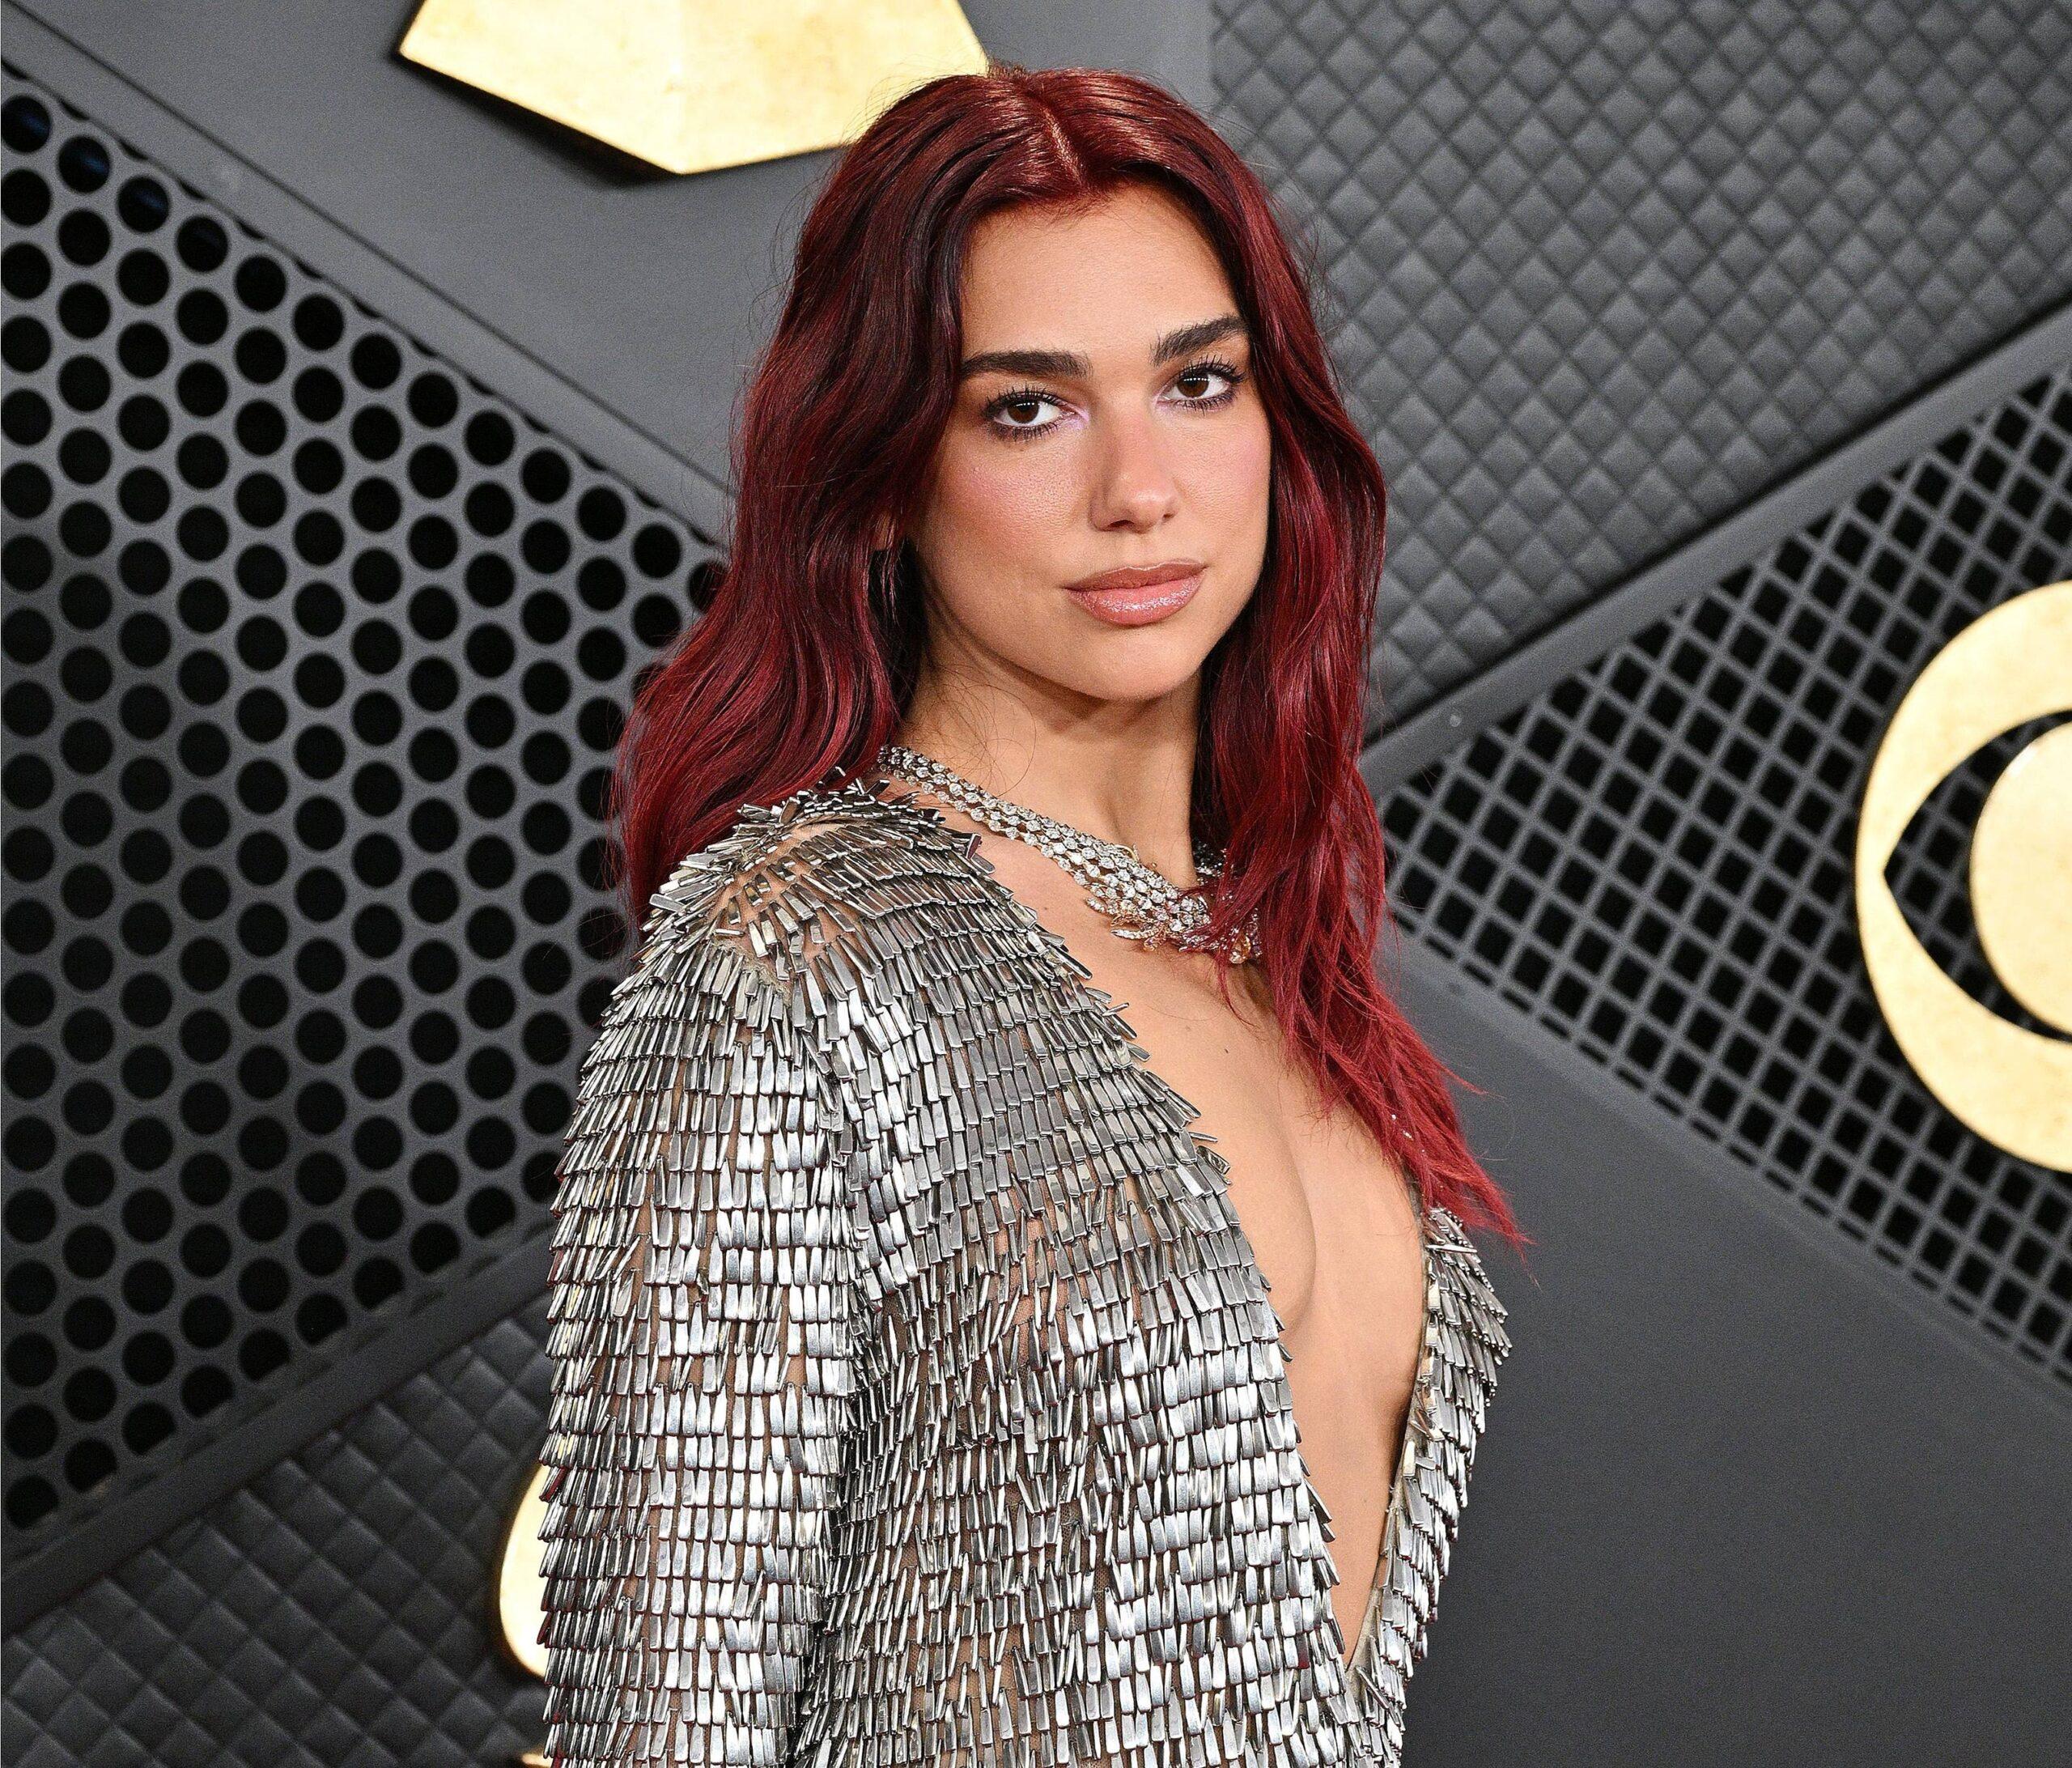 Dua Lipa's Latest Social Post Sparks Speculation: 'Who Wants More?'